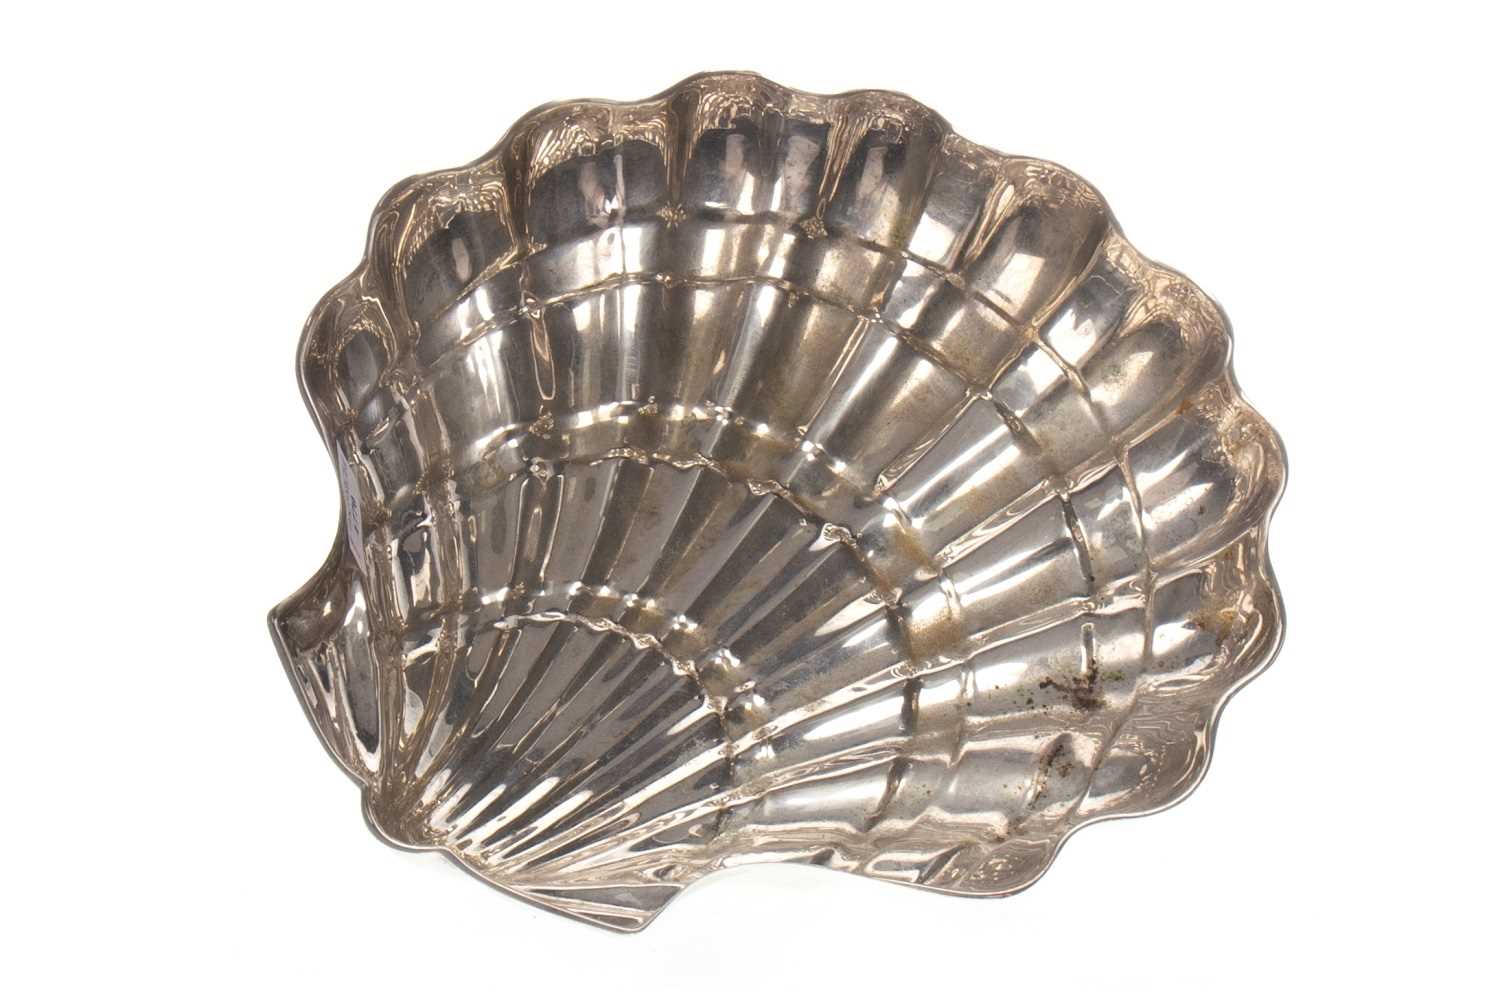 Lot 1770 - A SILVER PLATED OYSTER DISH IN THE FORM OF A SHELL